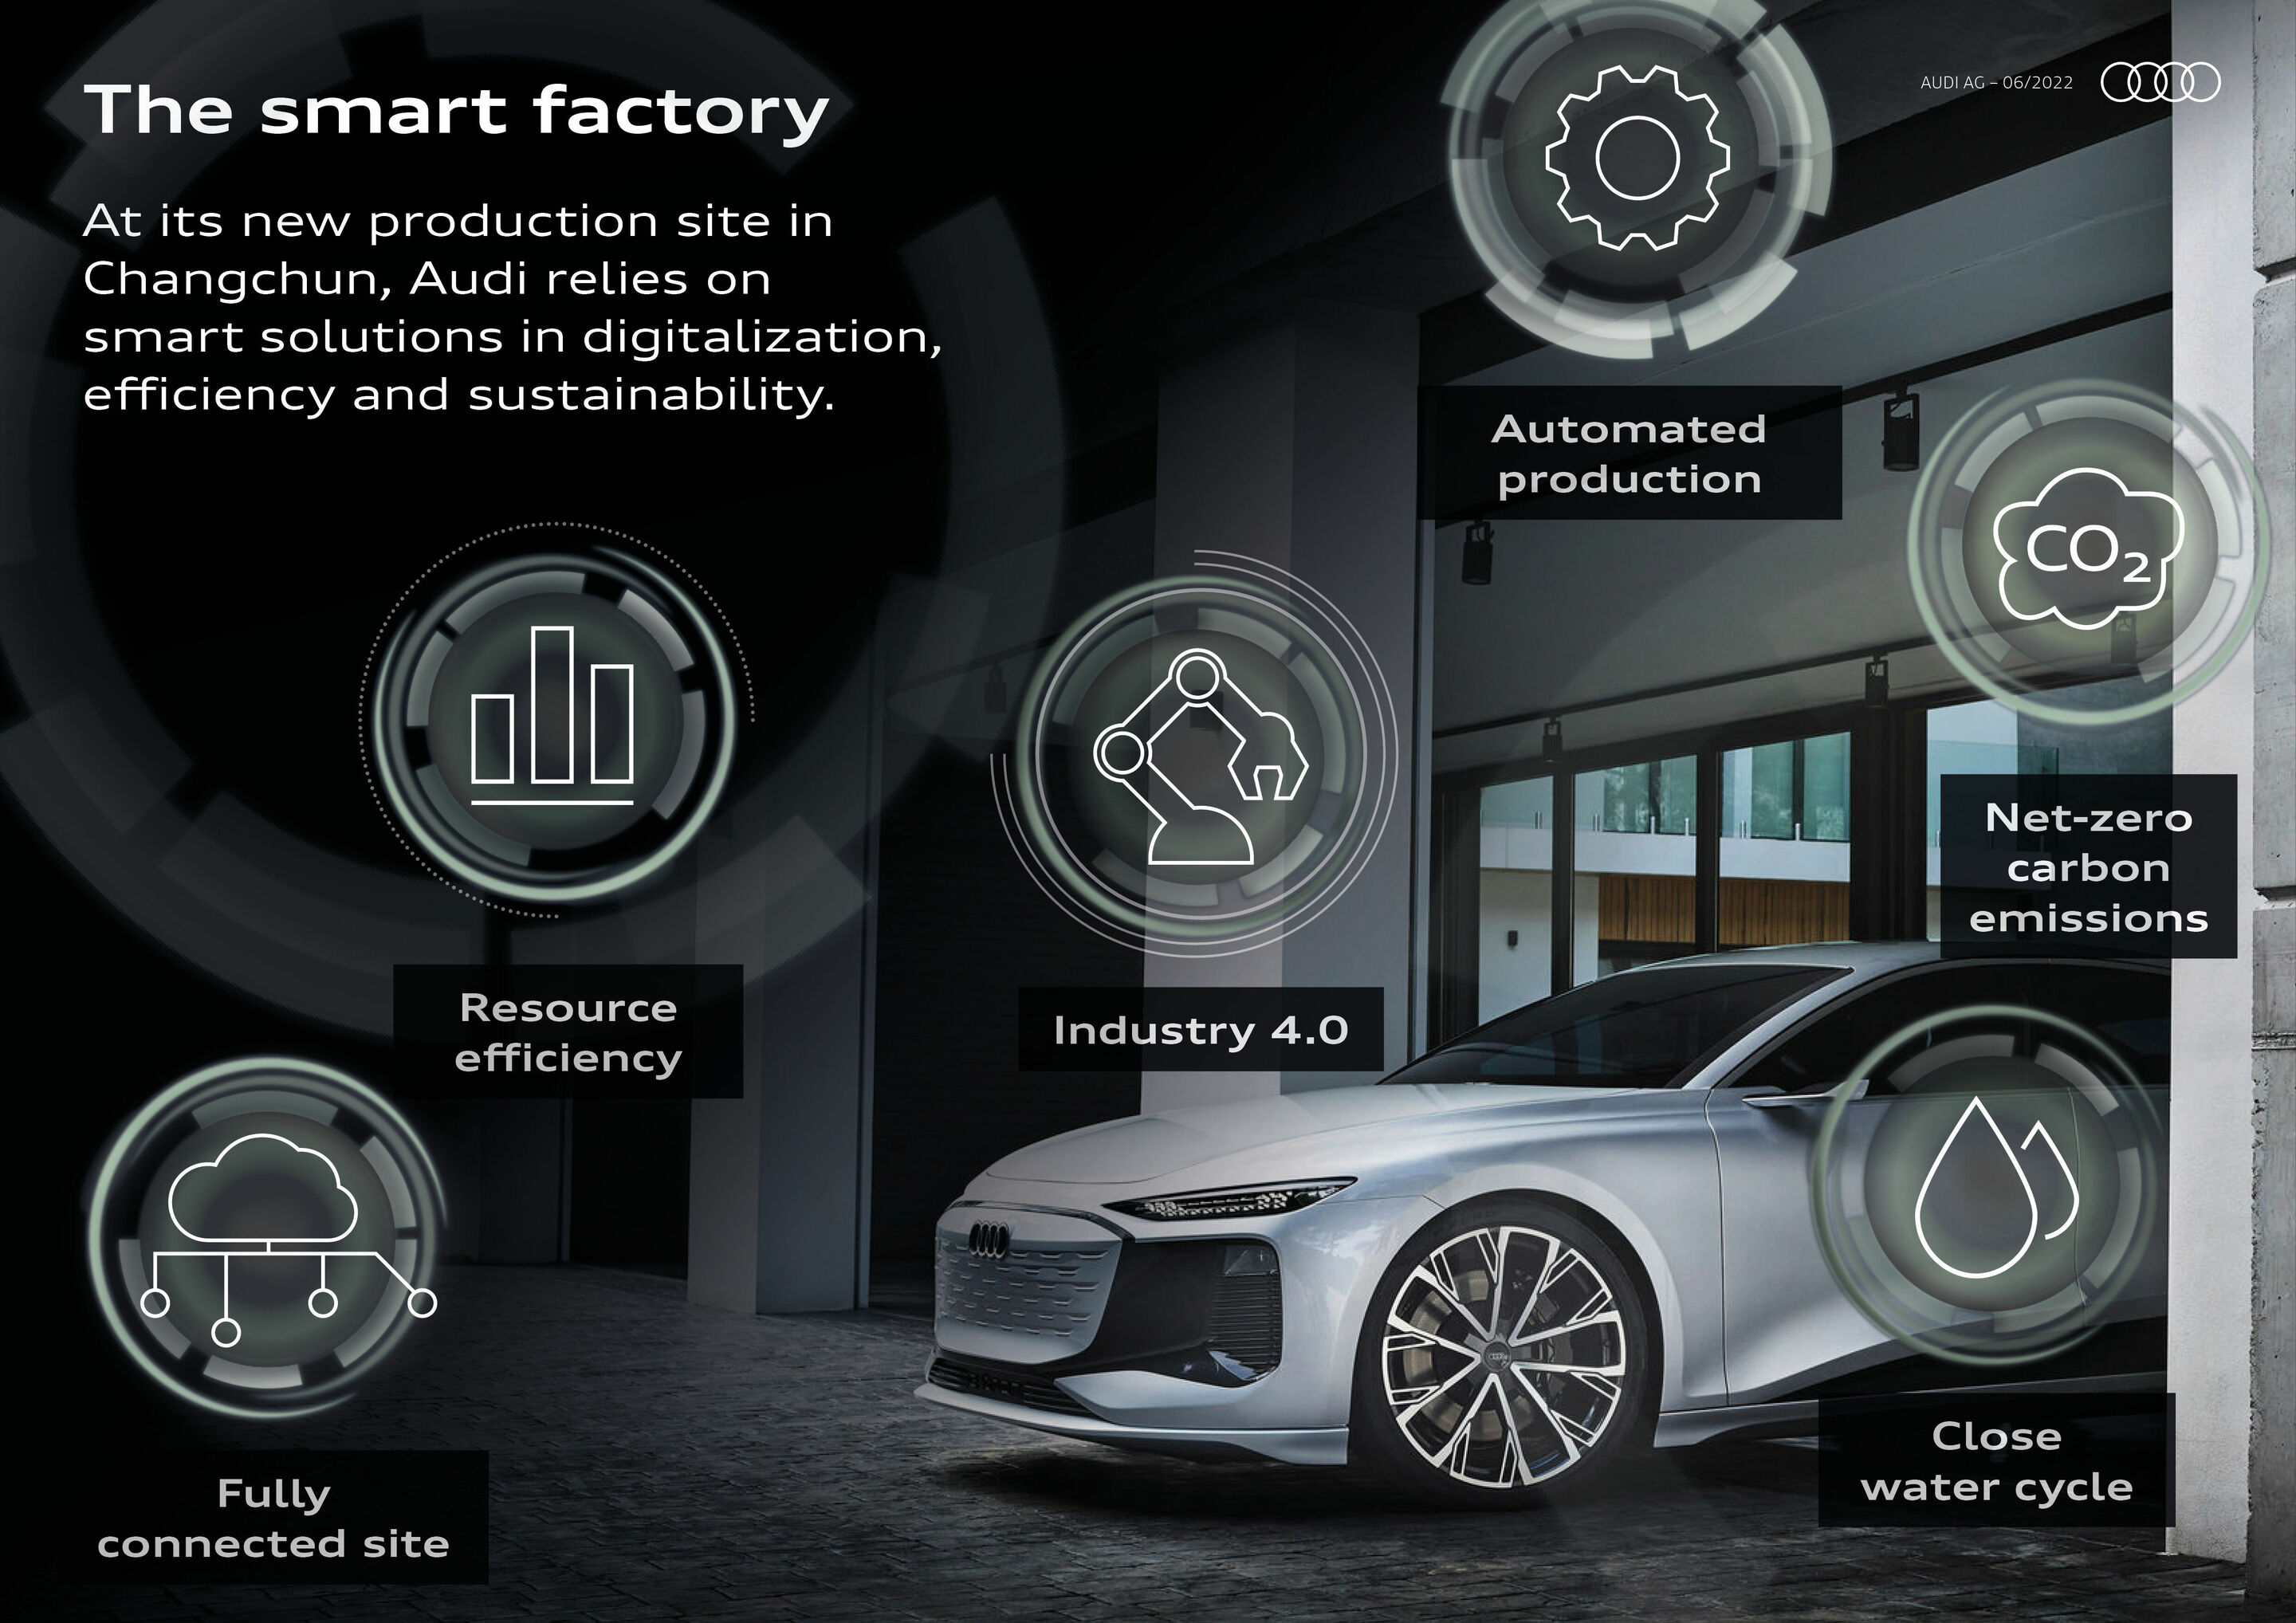 The smart factory